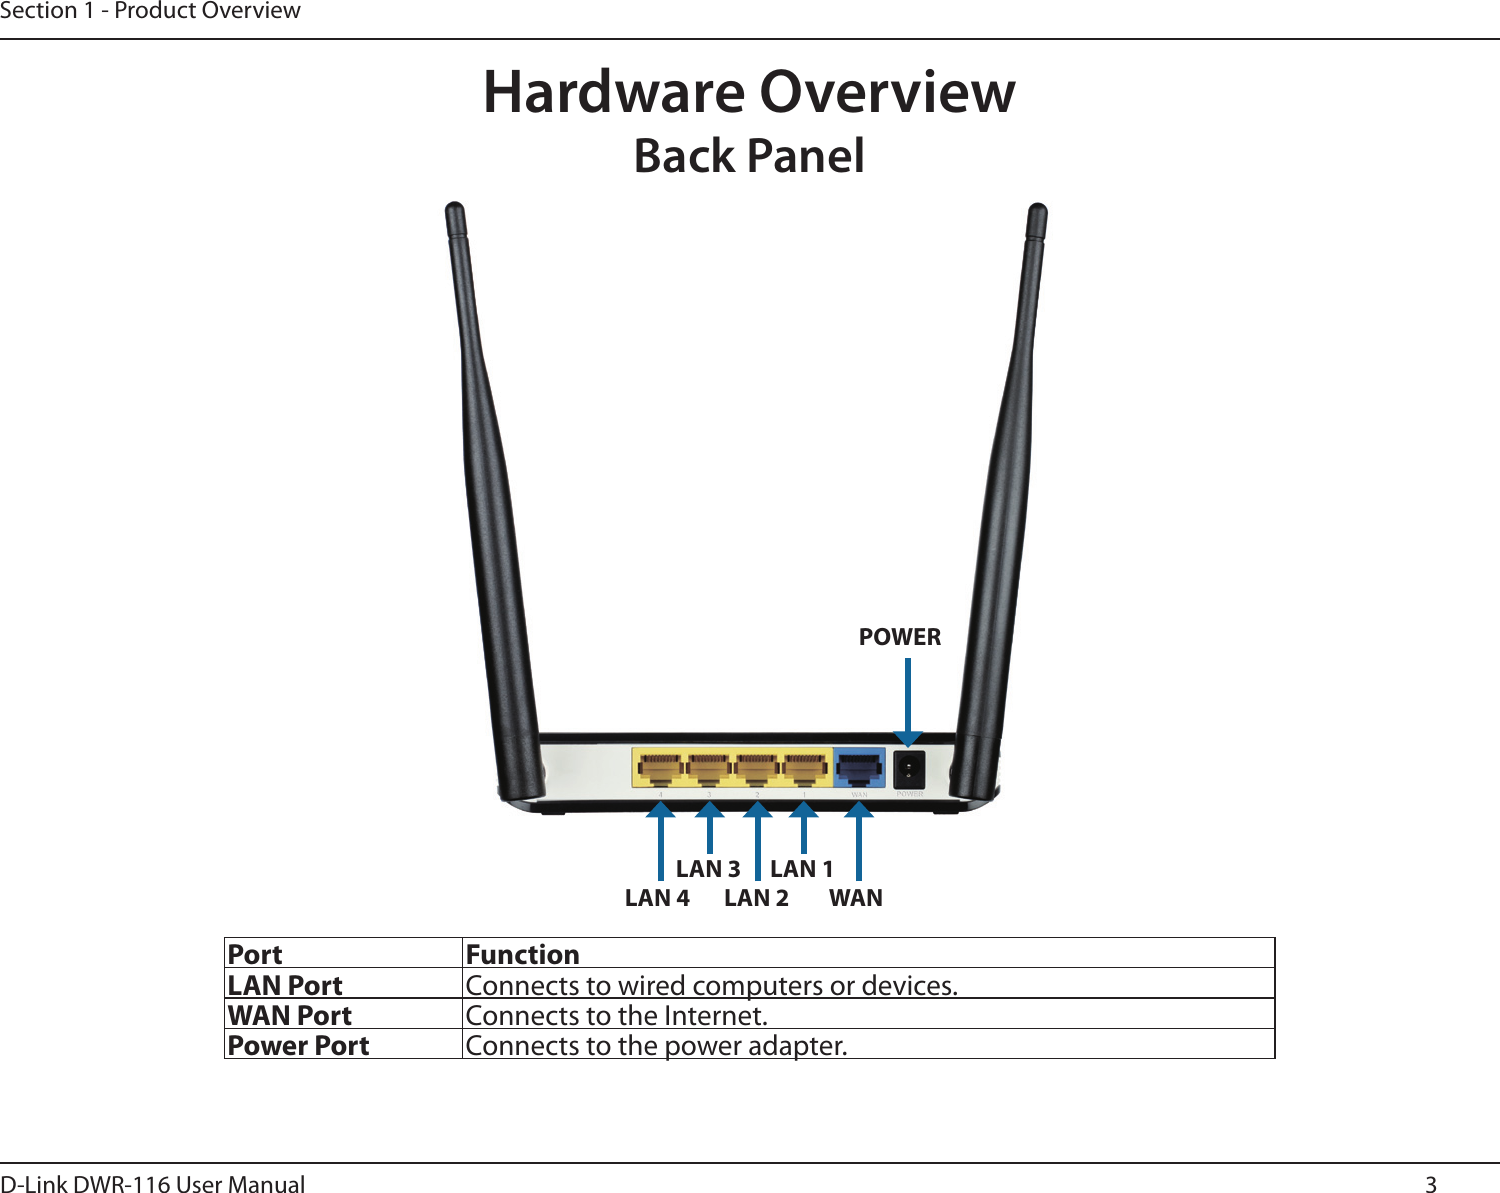 3D-Link DWR-116 User ManualSection 1 - Product OverviewHardware OverviewBack PanelPort FunctionLAN Port Connects to wired computers or devices.WAN Port Connects to the Internet.Power Port Connects to the power adapter.LAN 4LAN 3LAN 2LAN 1WANPOWER